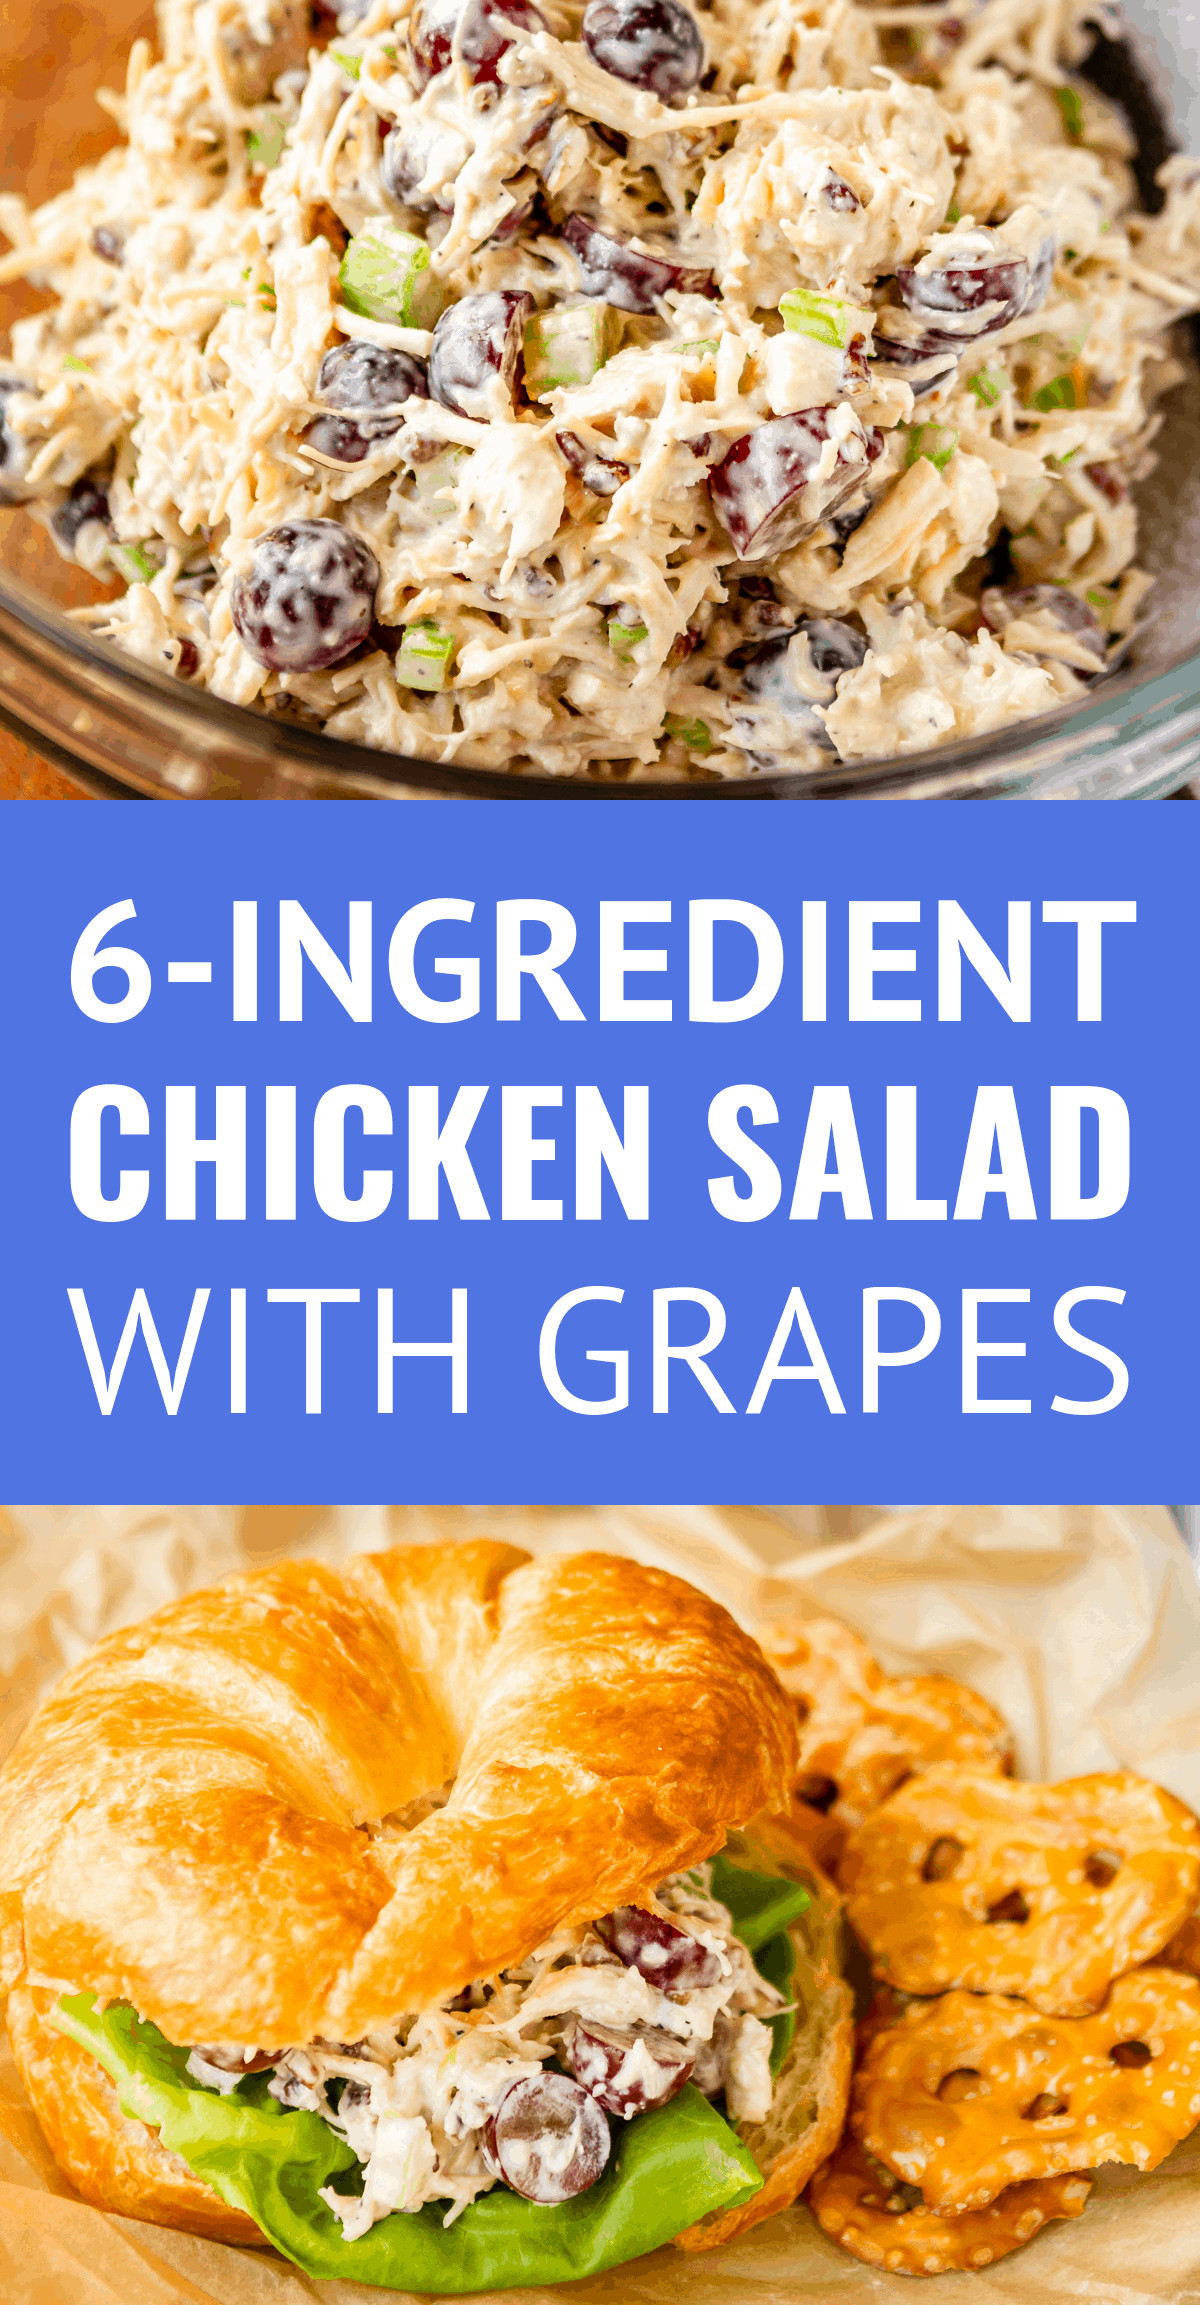 Chicken Salad Sandwich Recipe With Grapes And Pecans
 Chicken Salad With Grapes And Pecans 6 Ingre nts